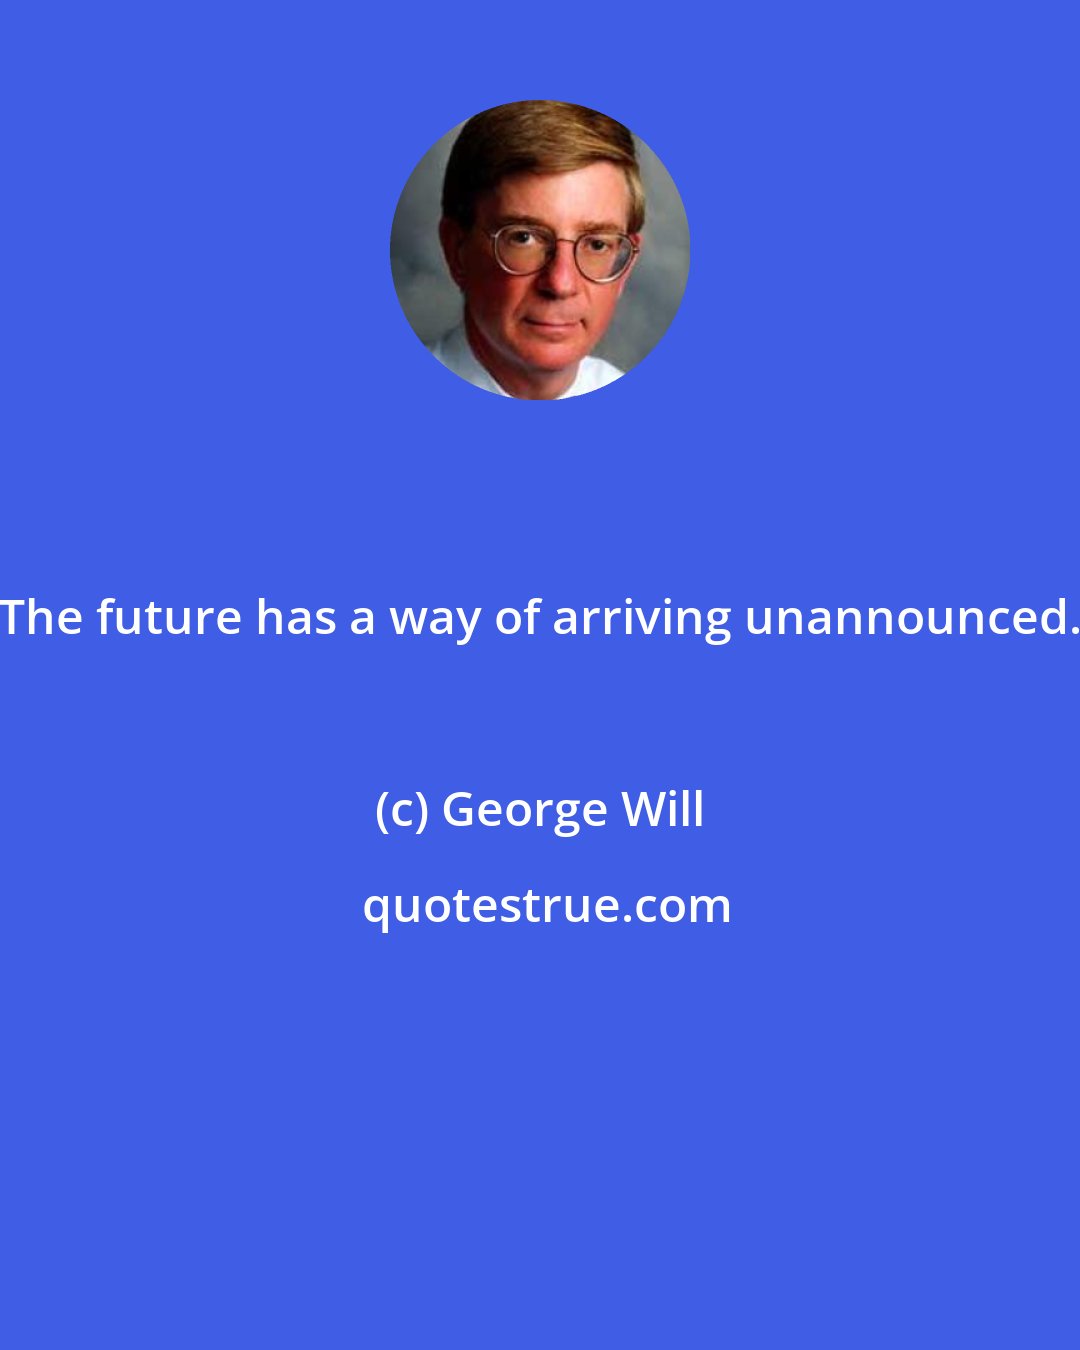 George Will: The future has a way of arriving unannounced.